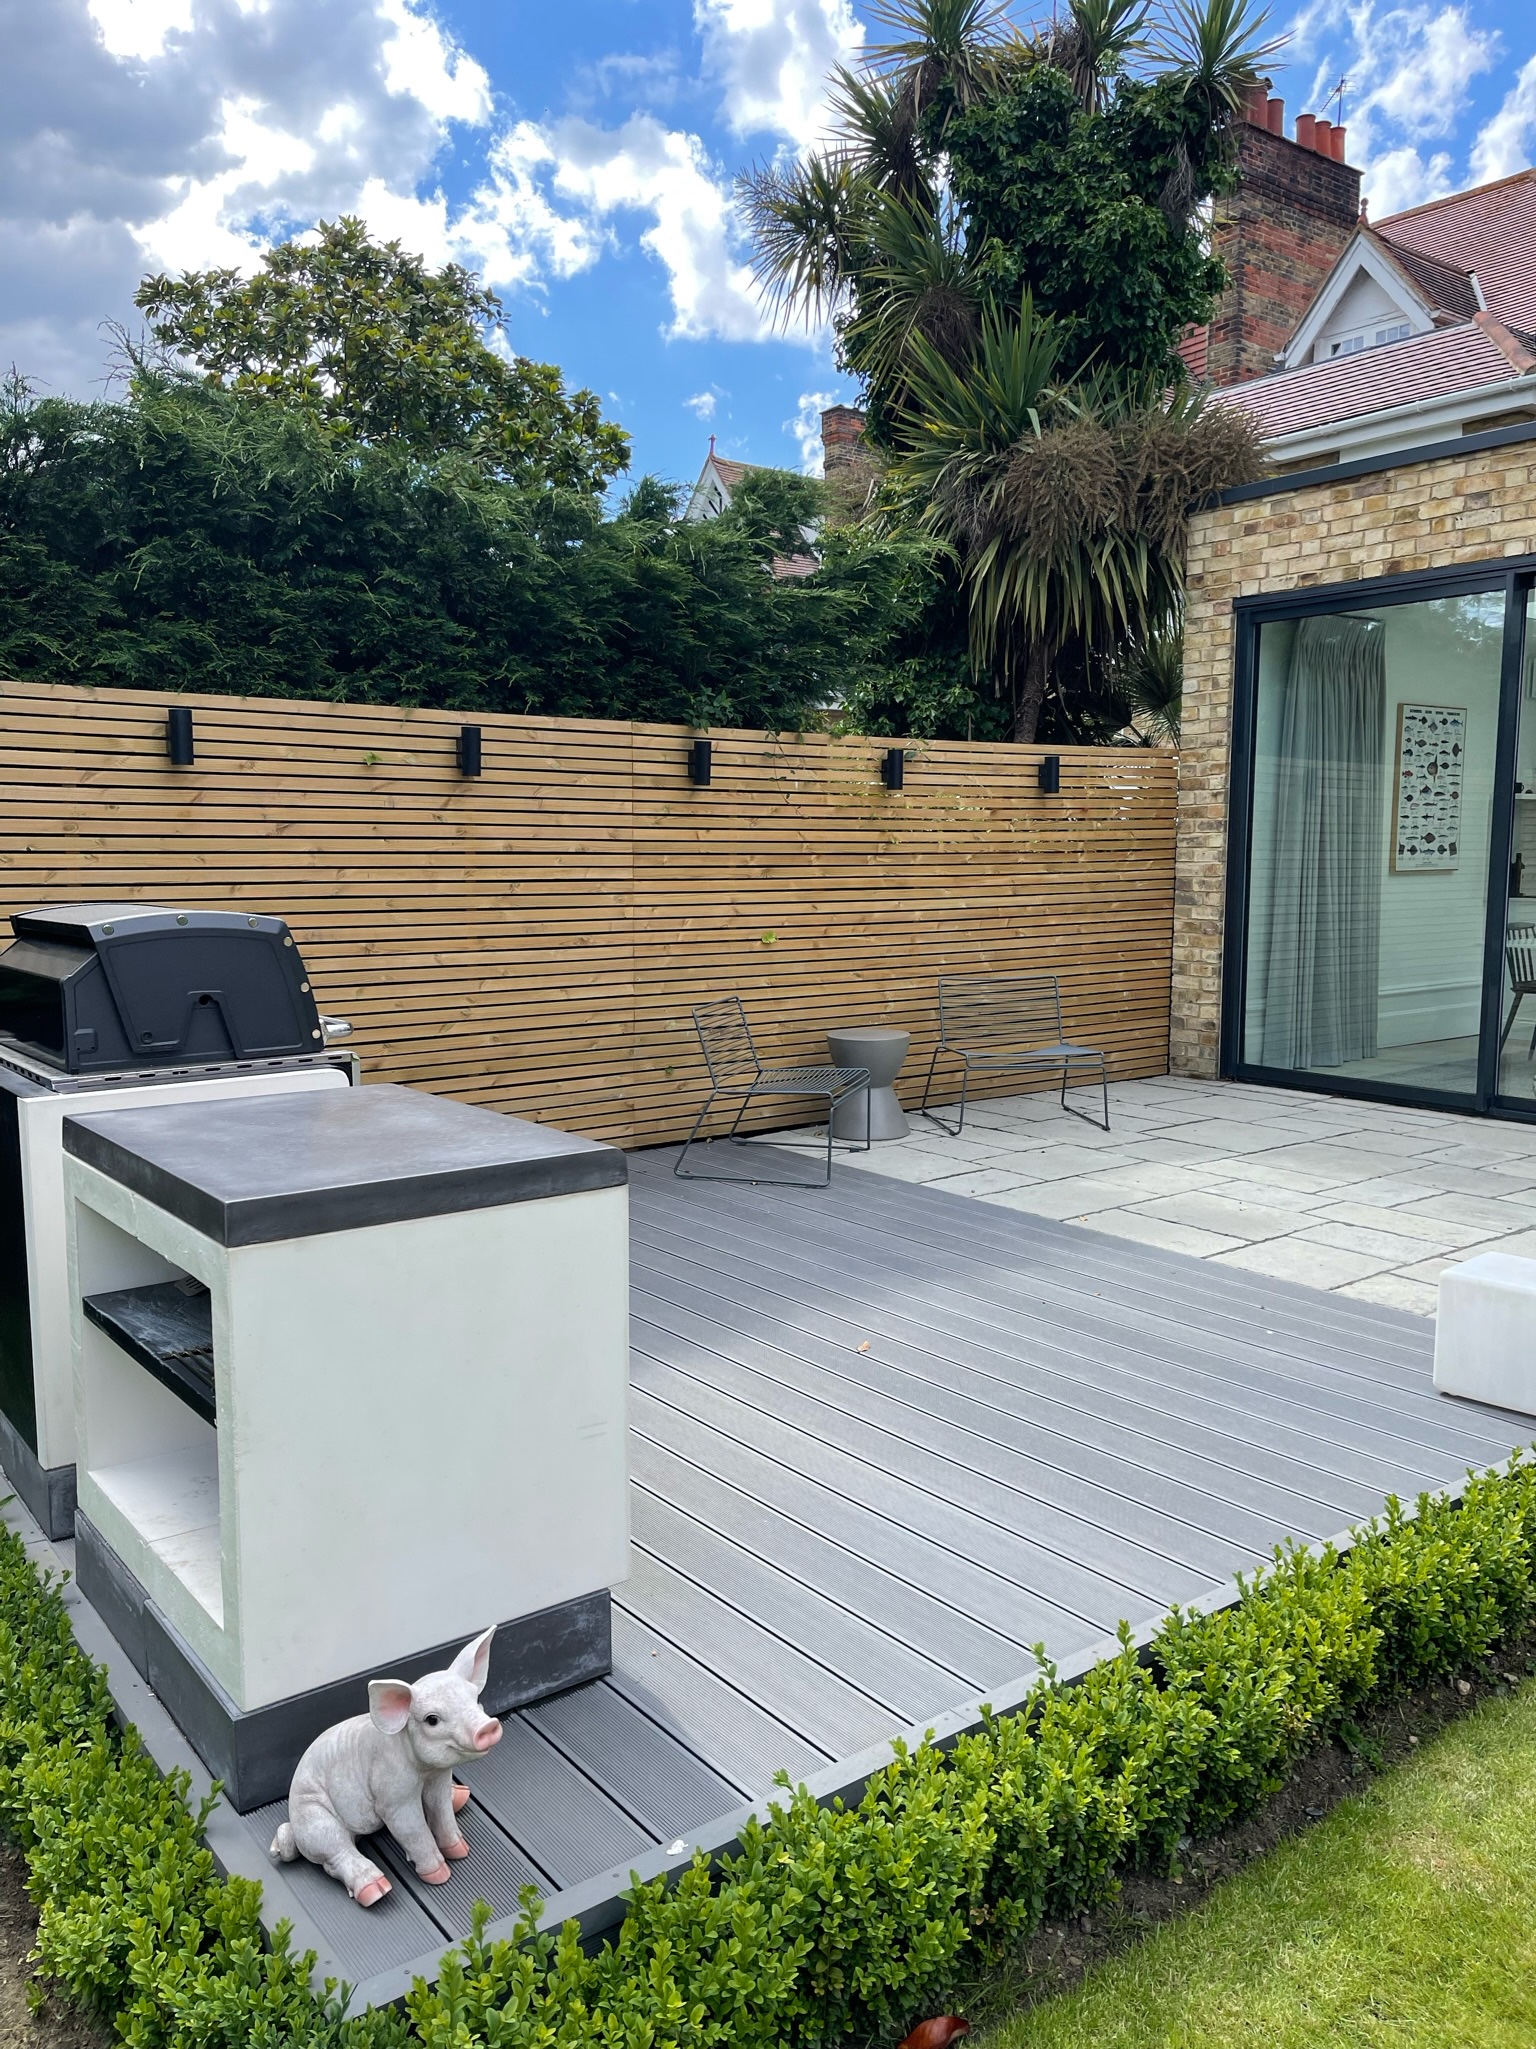 Enviro build sustainable composite decking with concrete kitchen